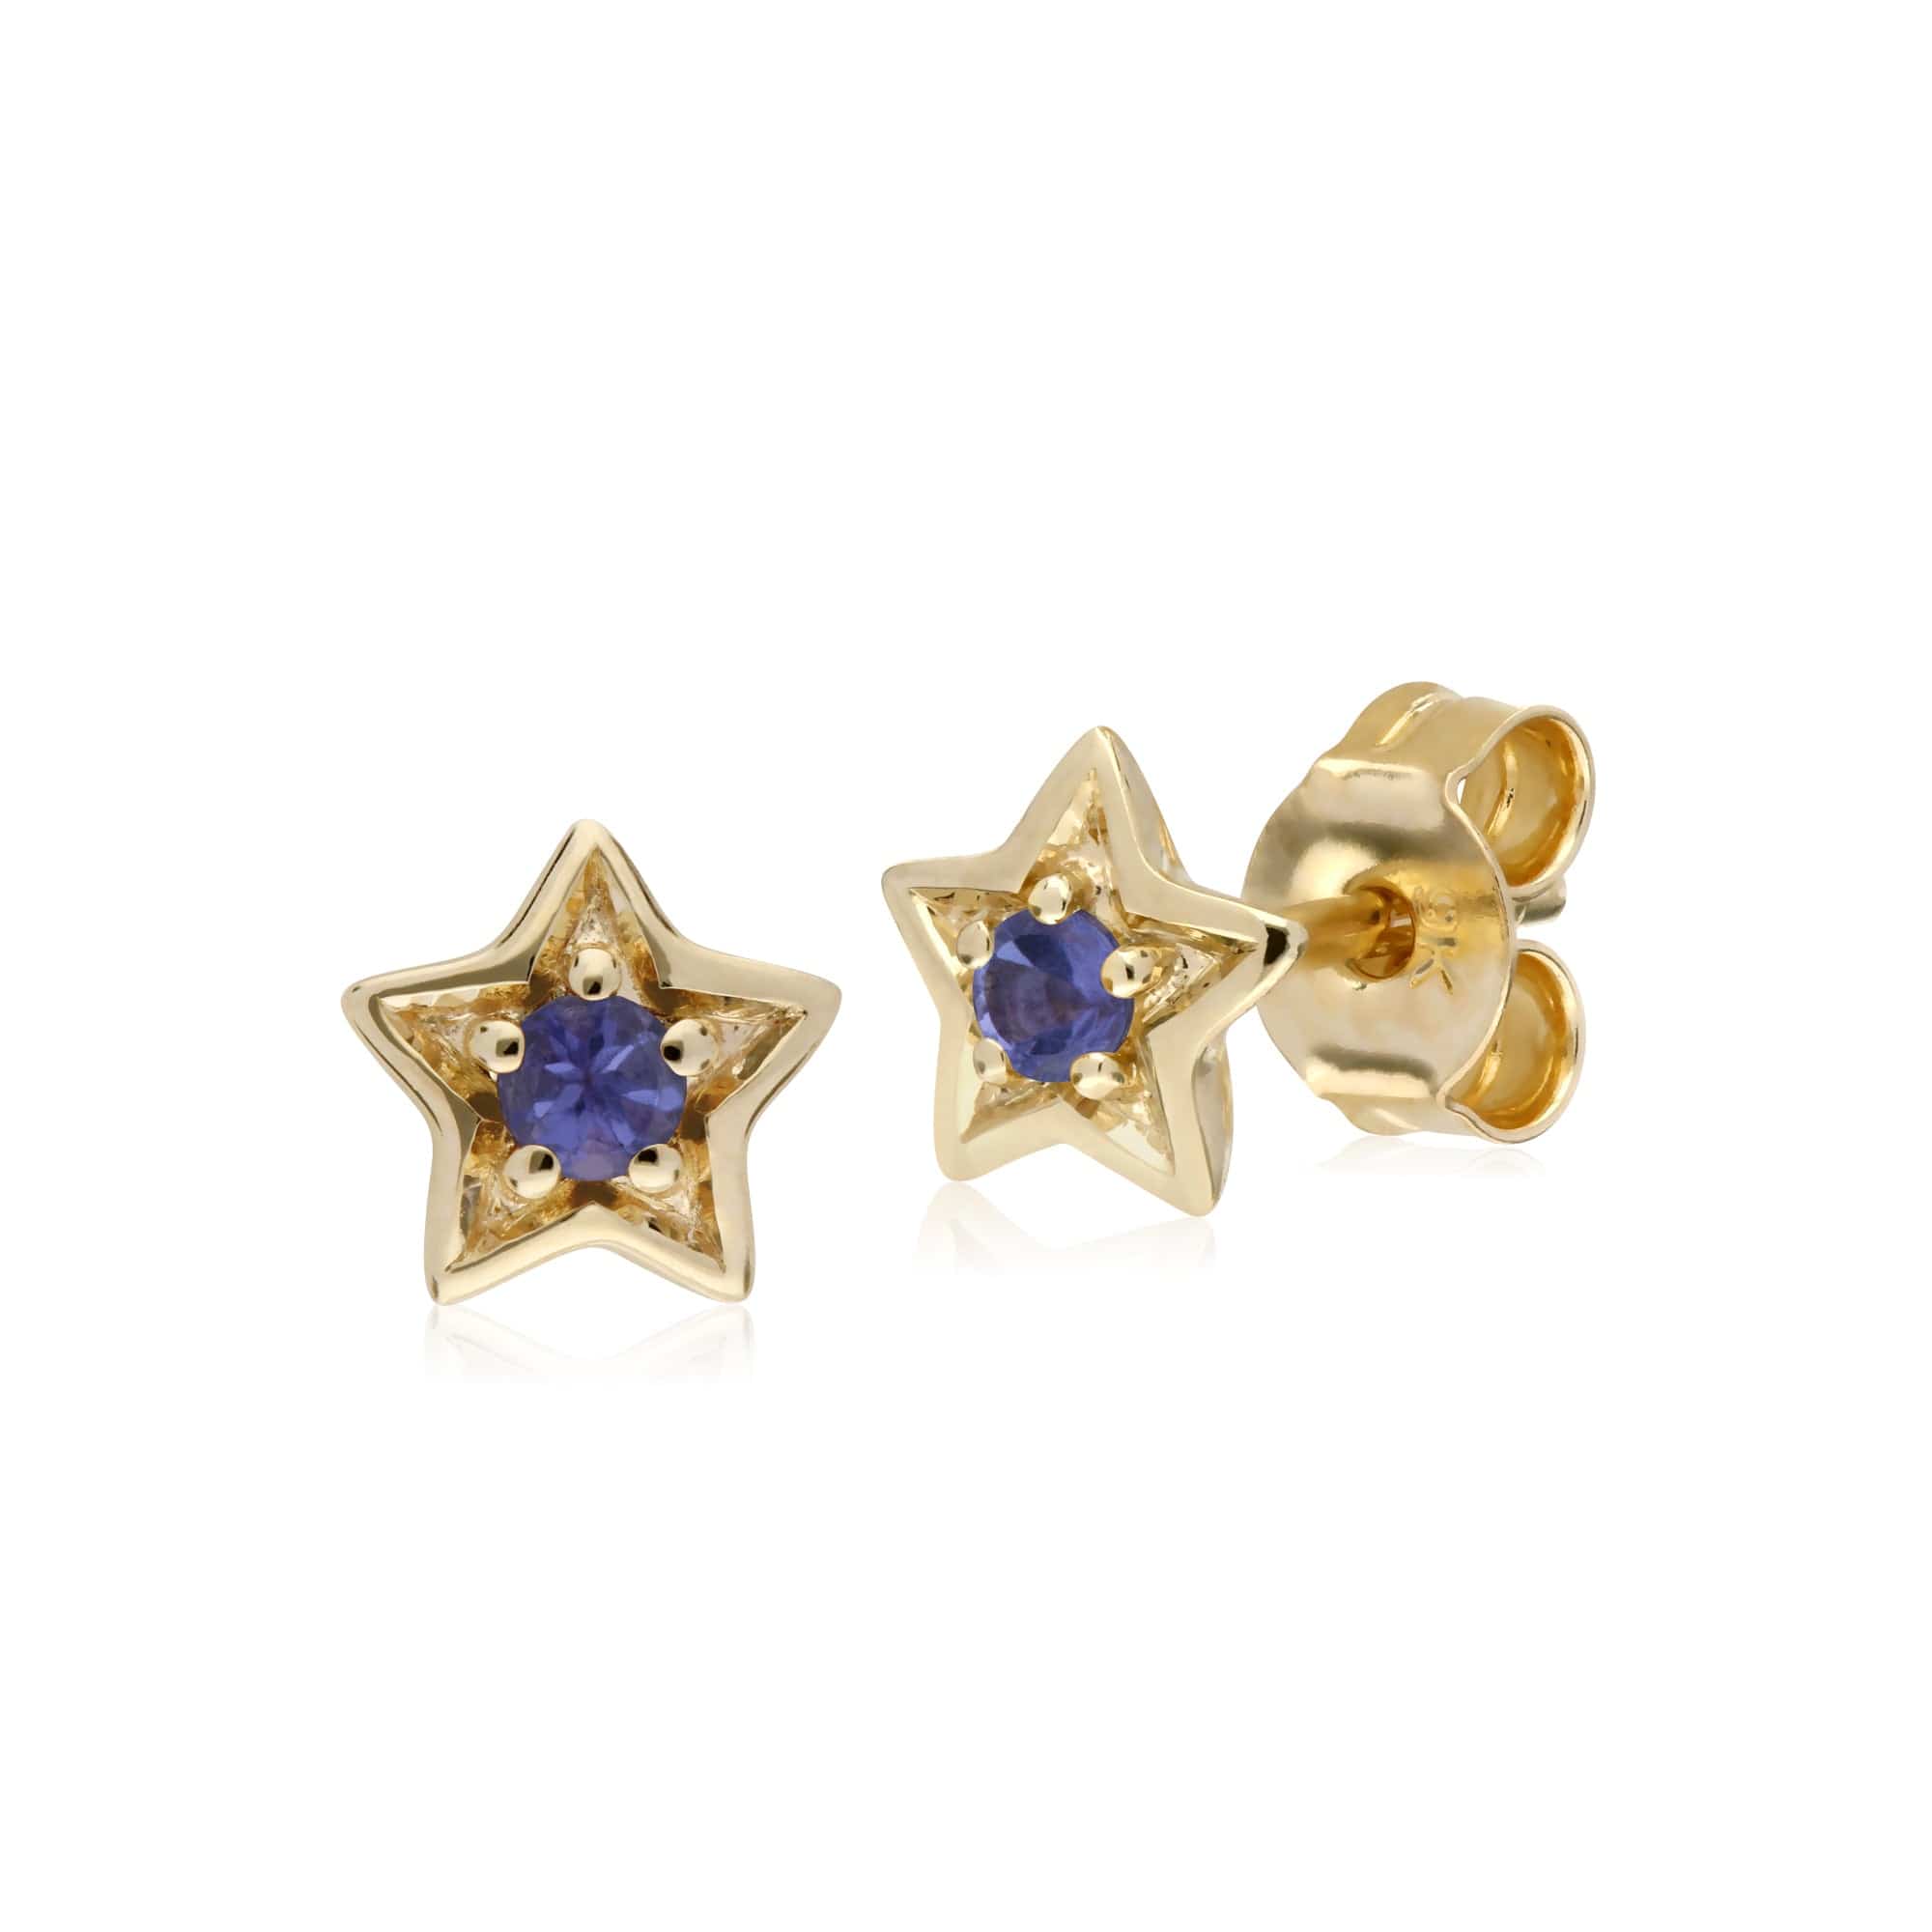 135E1523089-135P1874089 Contemporary Round Tanzanite Single Stone Star Earrings & Necklace Set in 9ct Yellow Gold 2